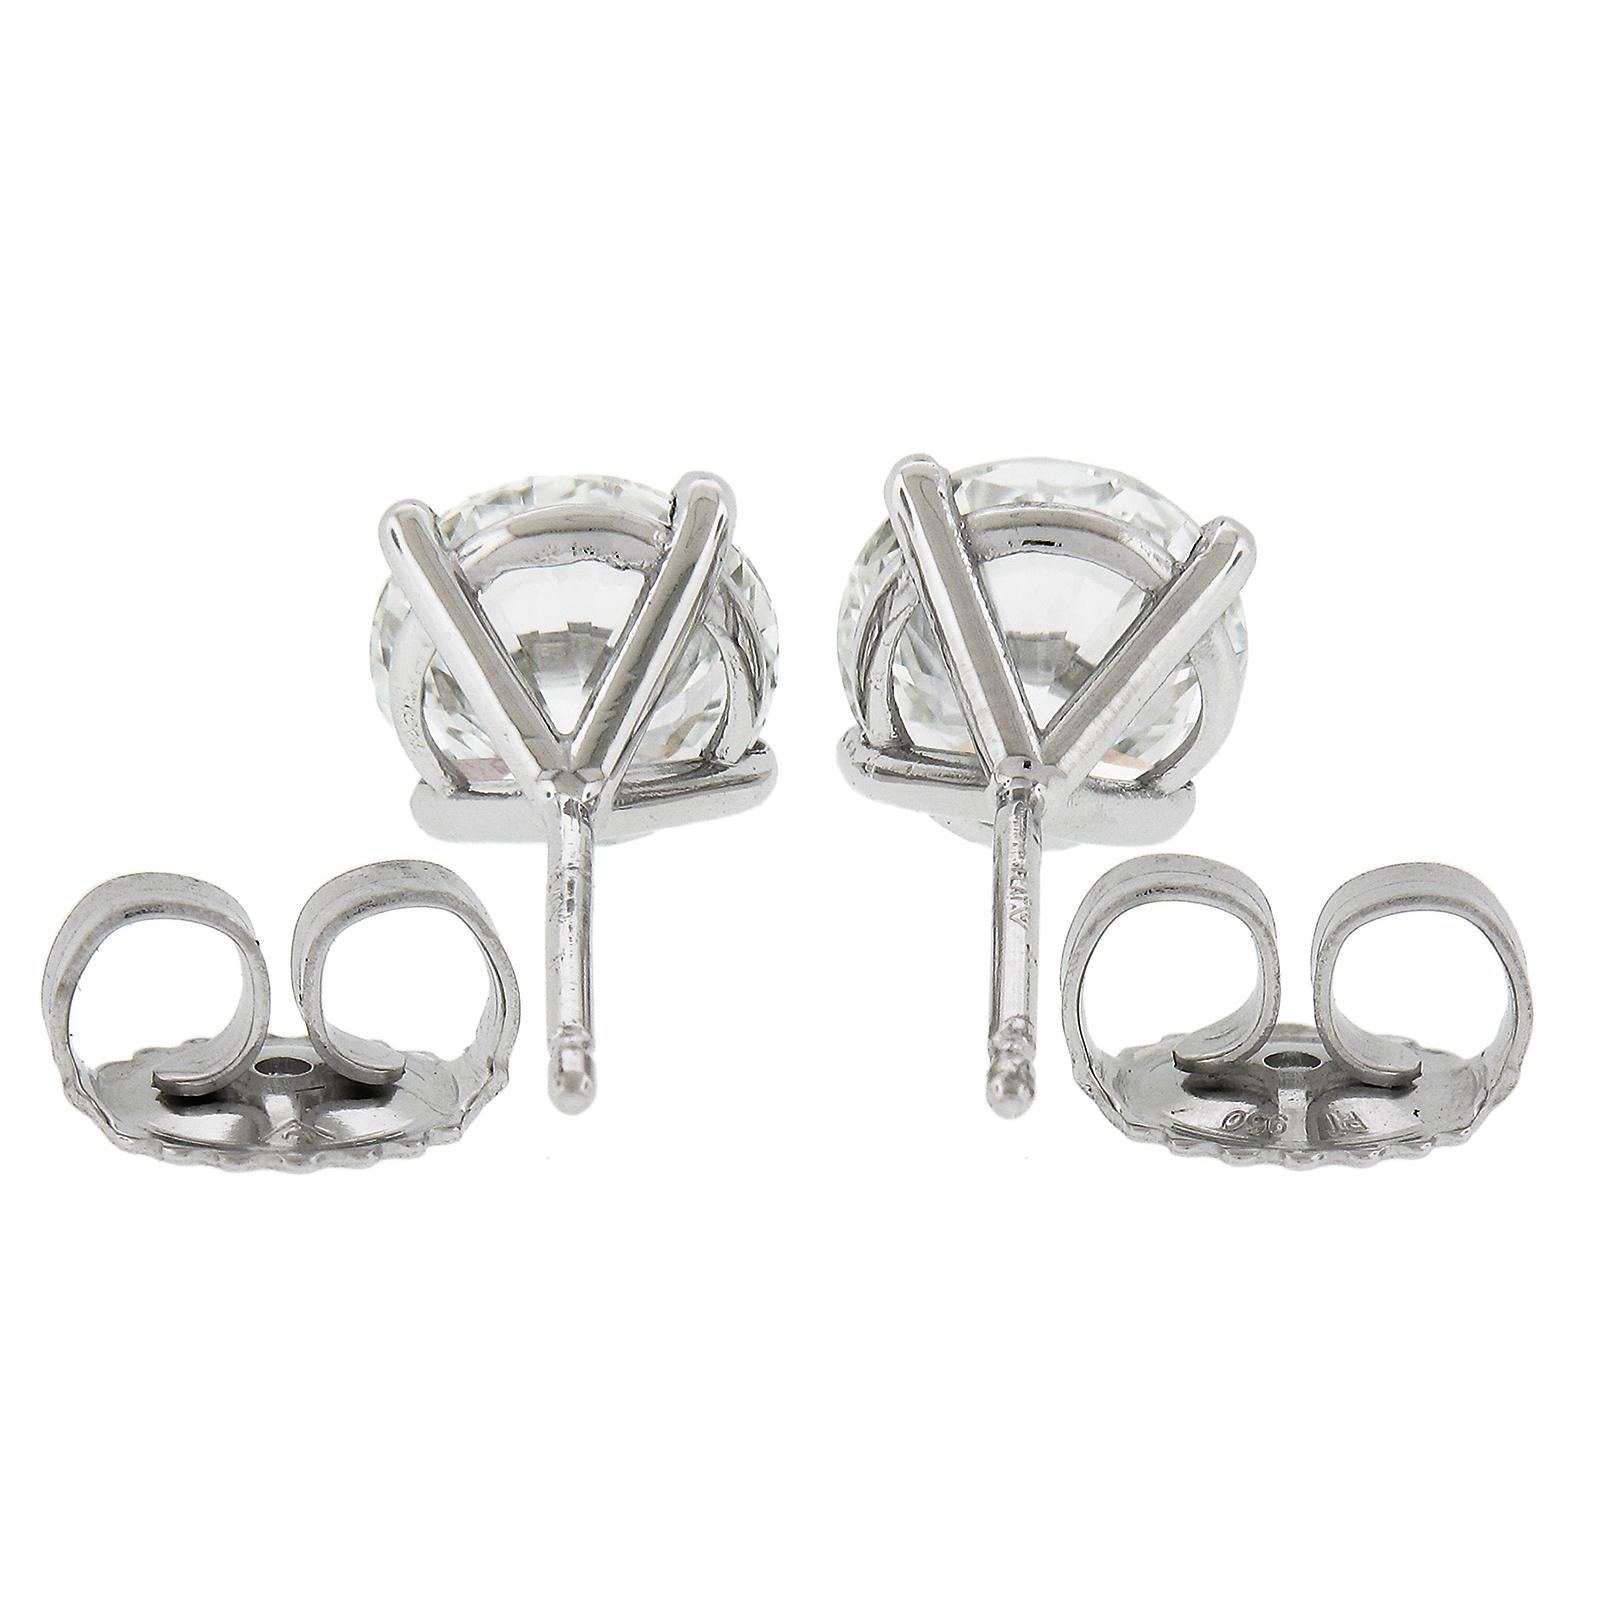 This classic and elegant pair of diamond stud earrings features two very well cut round brilliant and fiery, GIA graded diamonds that are neatly claw prong set in the stylish martini settings. These very fine quality diamonds total exactly 2.22